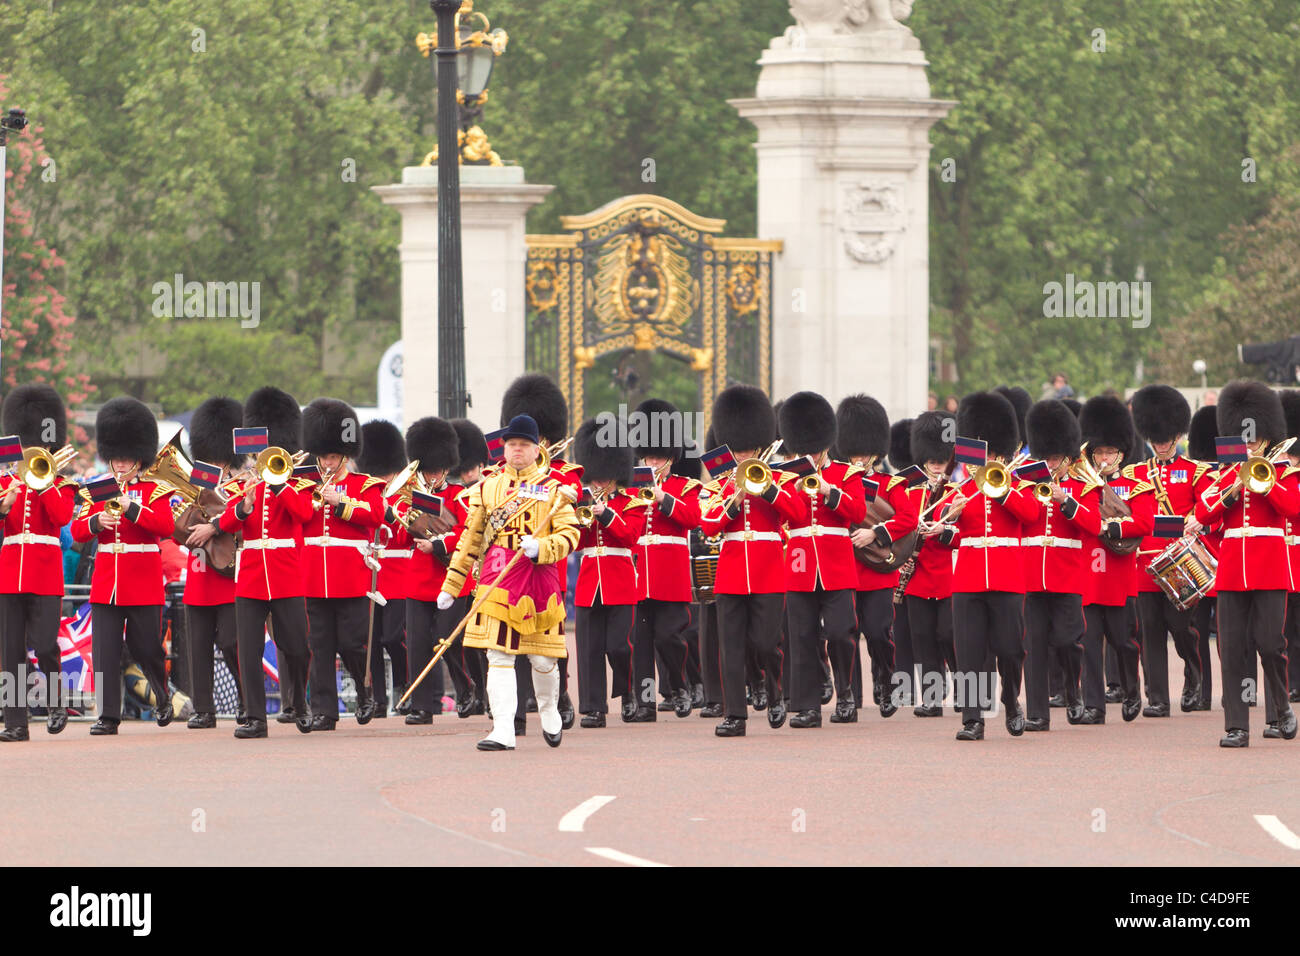 Military bands arrive for the royal wedding of Prince William and Kate Middleton, (April 29, 2011), London Stock Photo